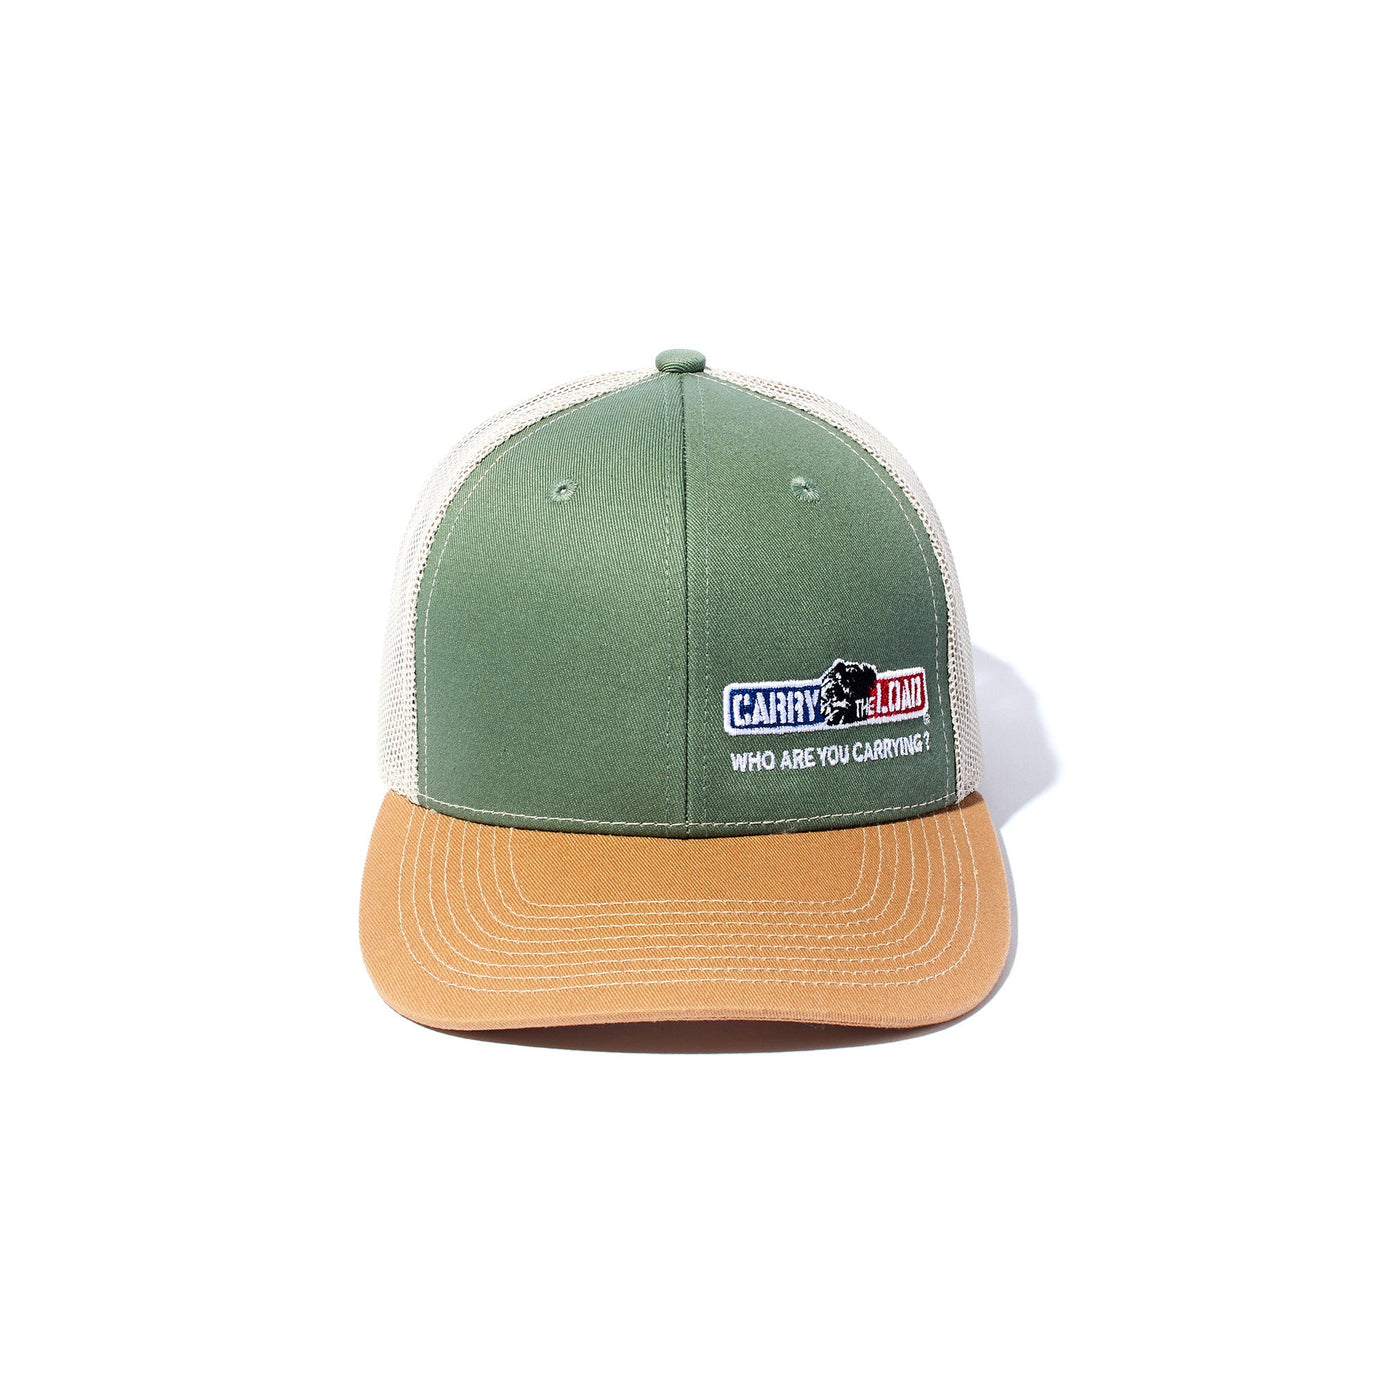 Green Truck Style Cap - Carry The Load Shop